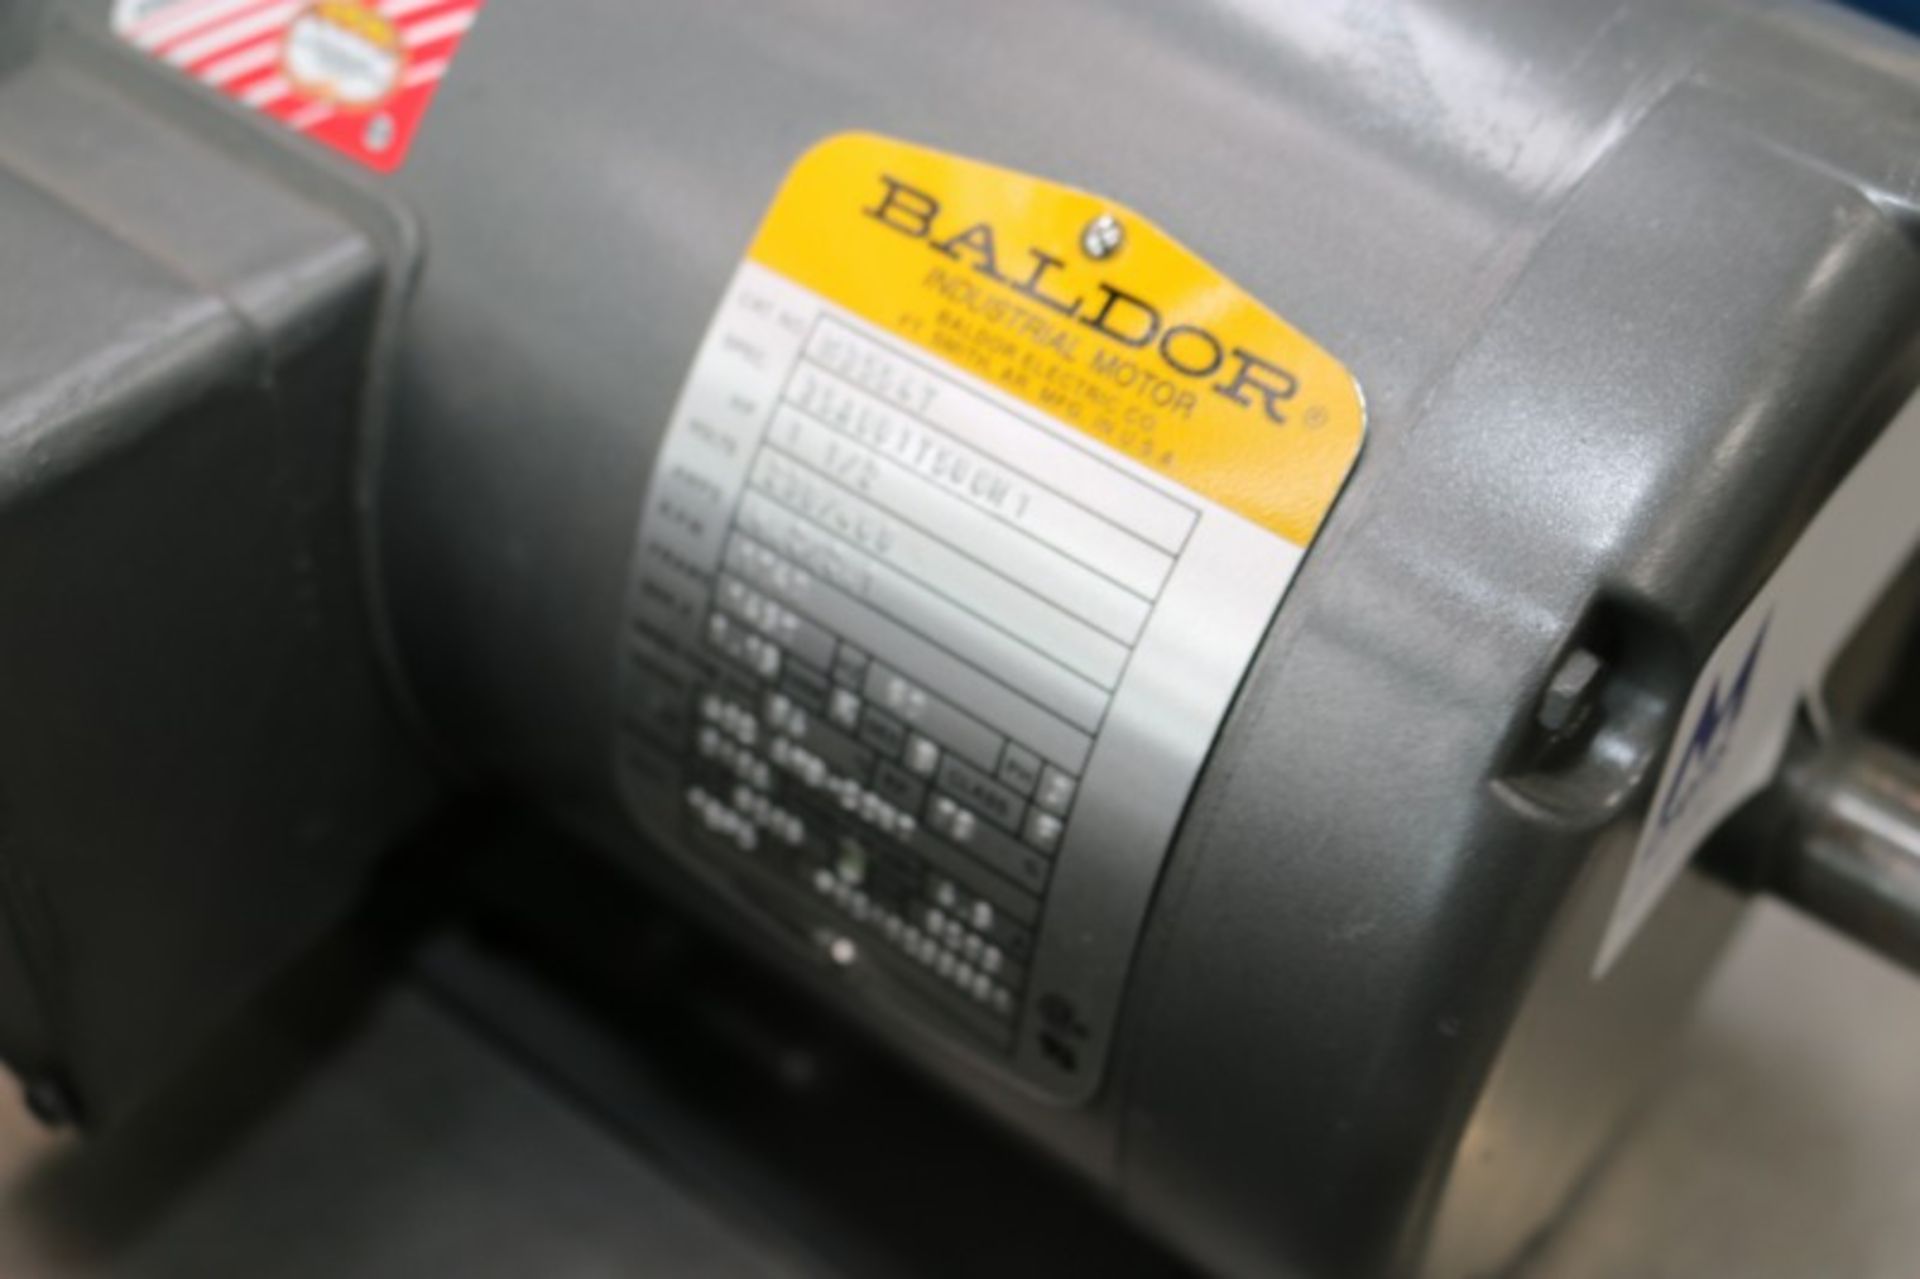 (2) NEW Baldor 1-1/2 hp Motors, 230/460 Volts, 3 Phase, 1740 RPM (INV#81041)(Located @ the MDG - Image 5 of 5